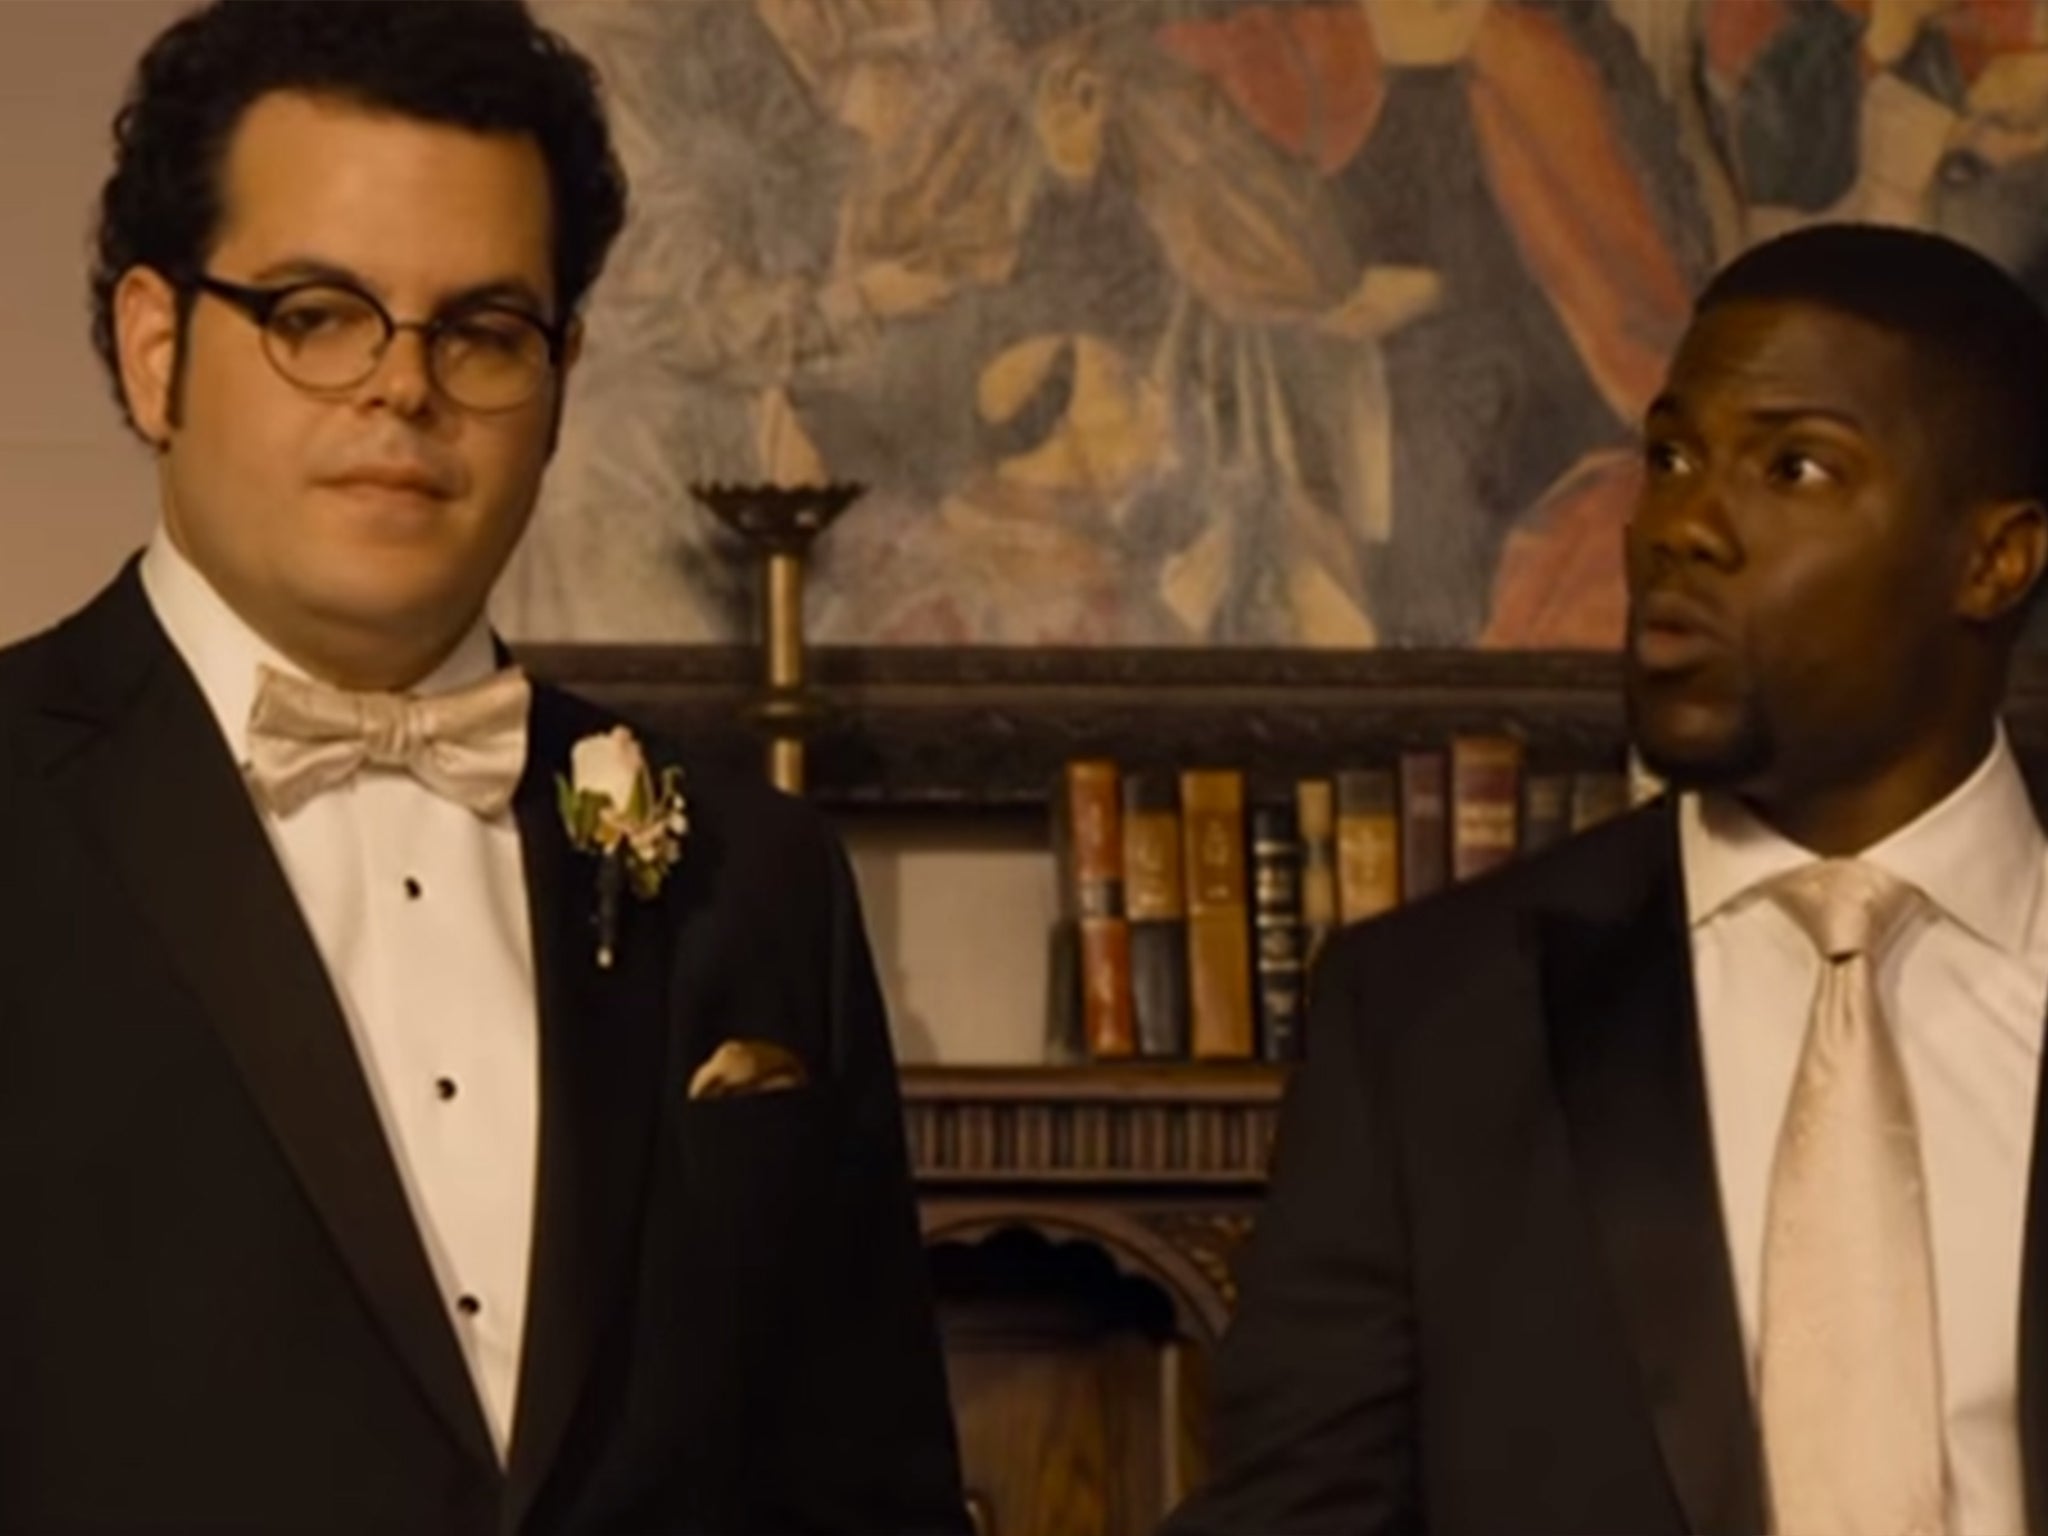 Josh Gad and Kevin Hart in 'The Wedding Ringer'